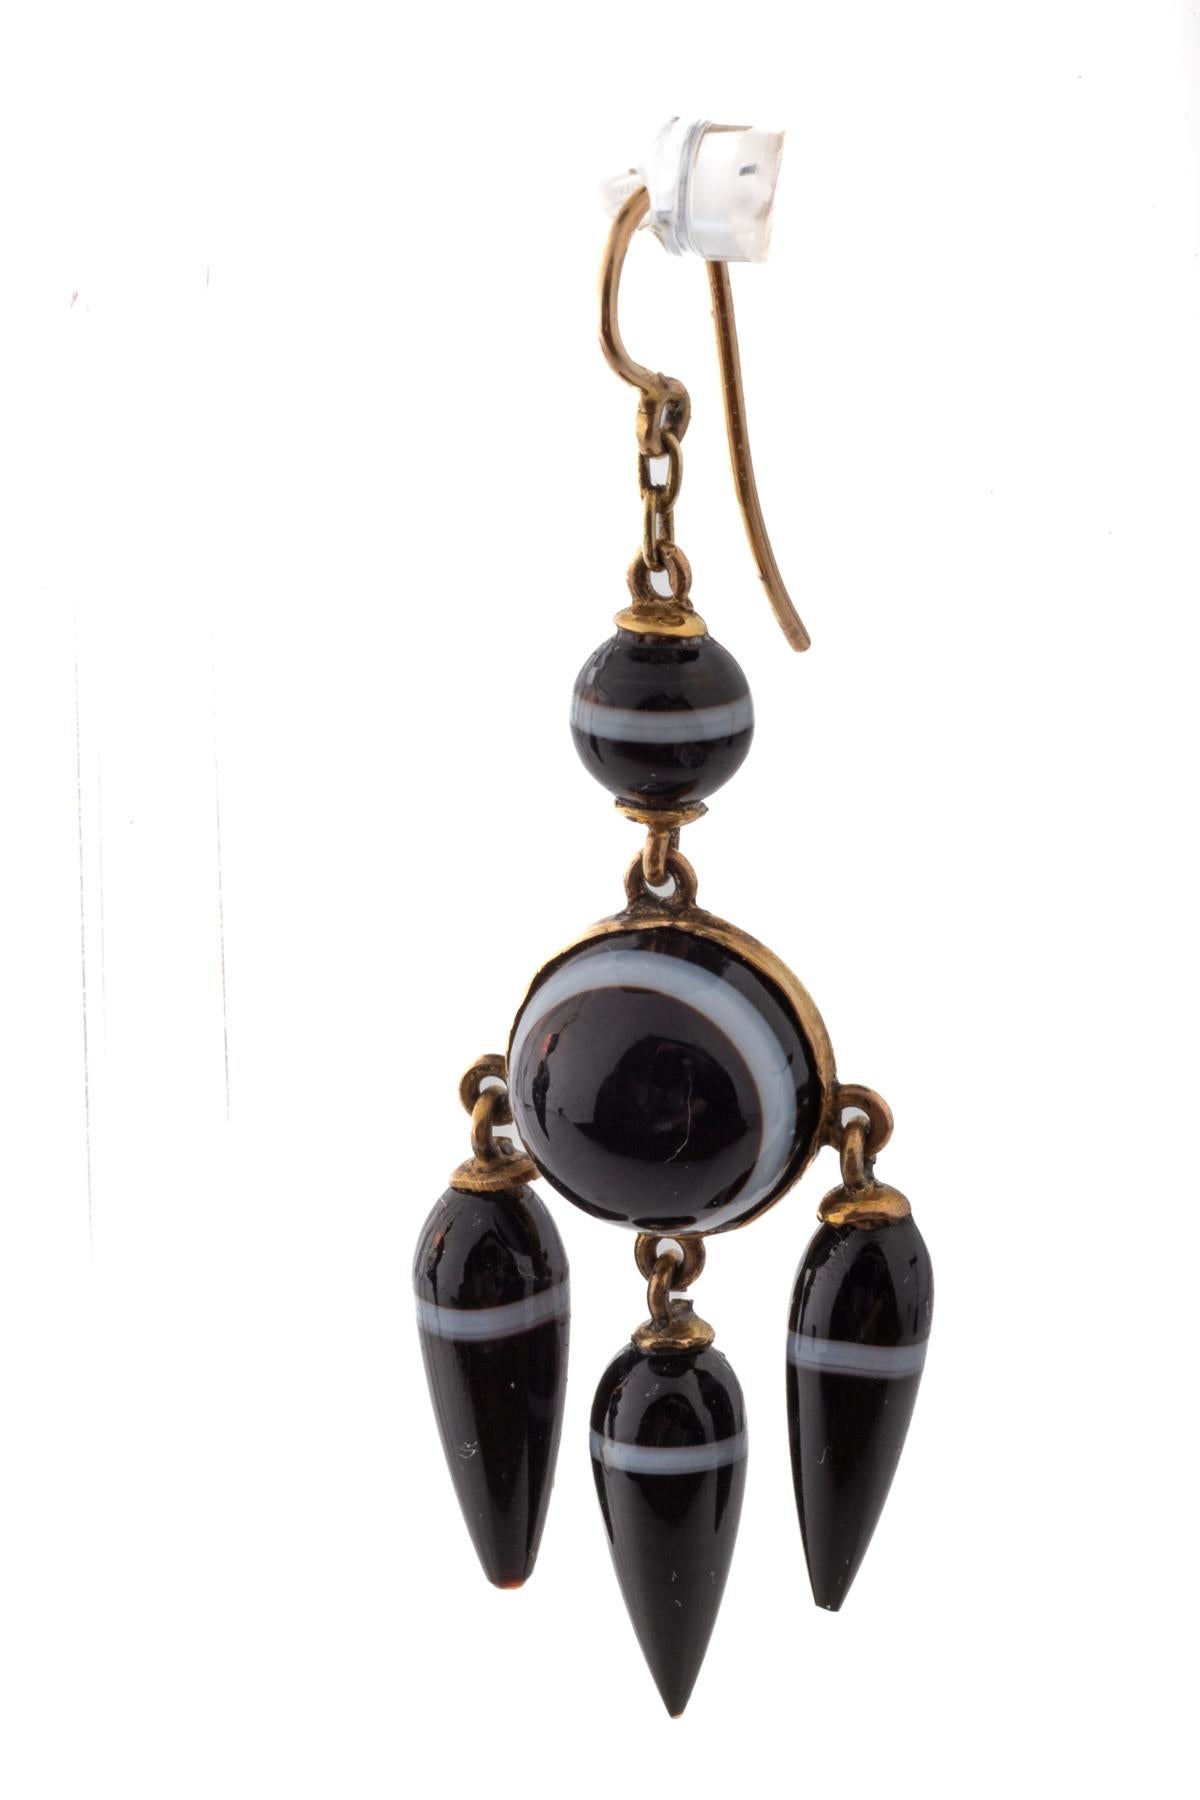 It is unusual to find Mid Victorian Banded agate earrings in girandole form. These earrings have perfectly matched white bands at the center of the teardrops and at the top of the earrings. They have the romantic quality to move with he slightest